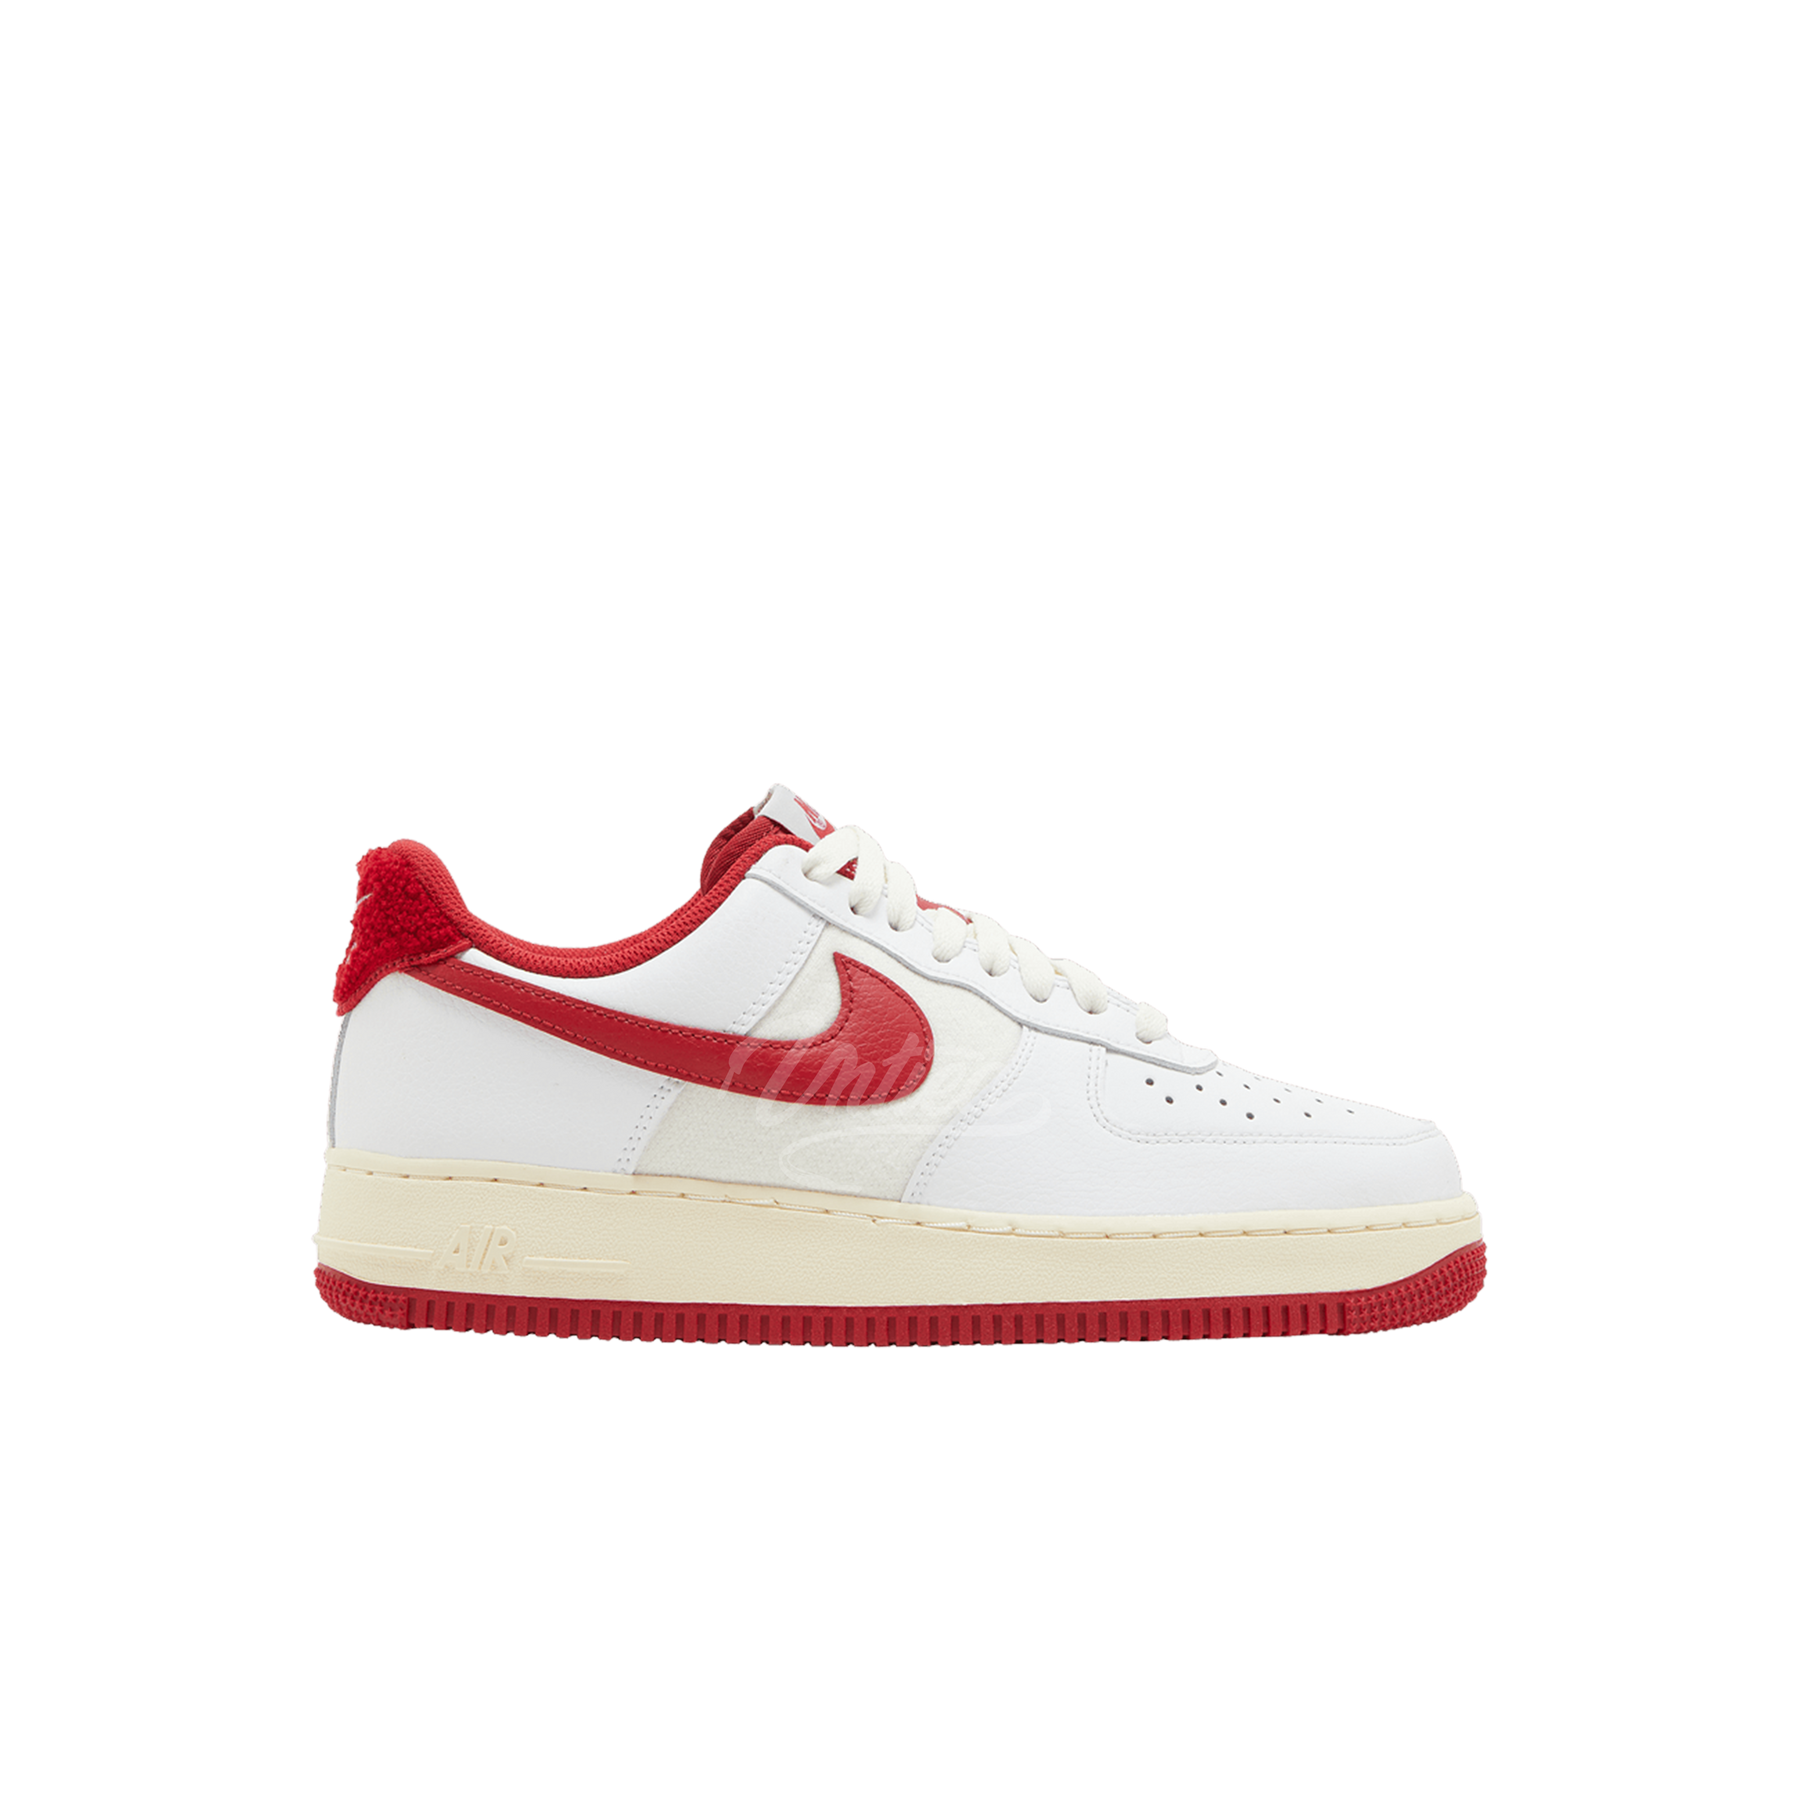 Air Force 1 "White/Gym Red"